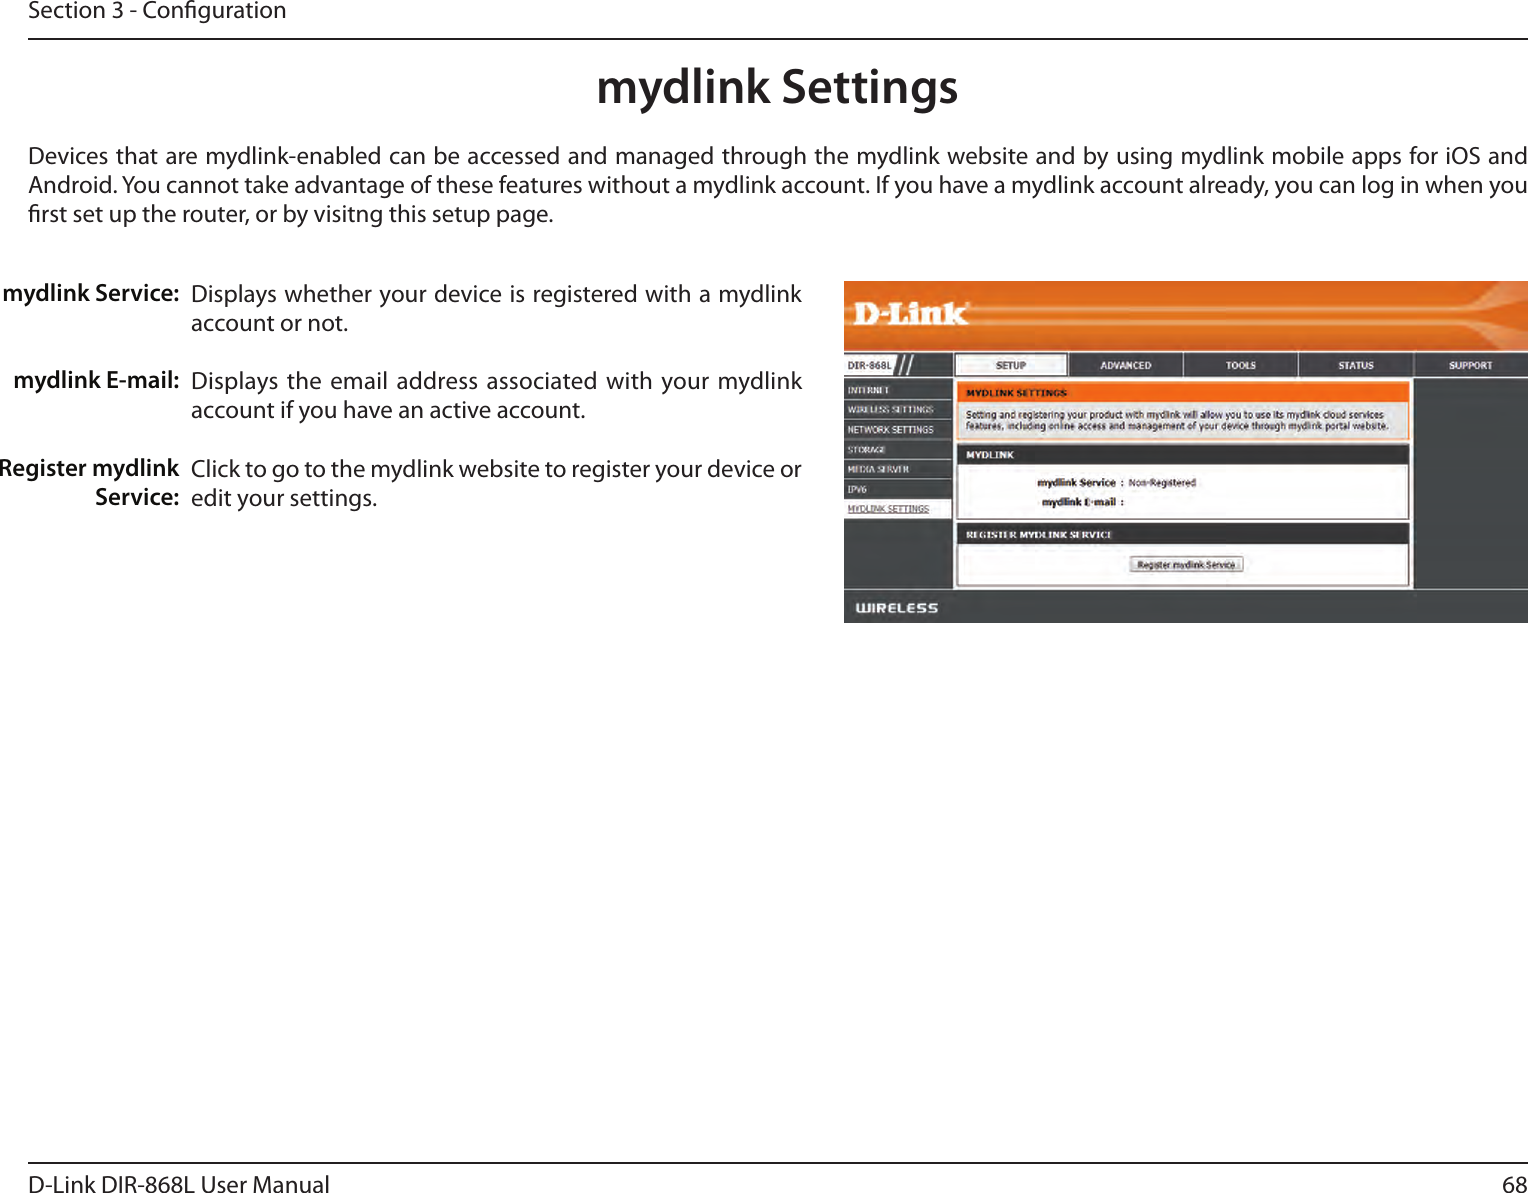 68D-Link DIR-868L User ManualSection 3 - Congurationmydlink SettingsDisplays whether your device is registered with a mydlink account or not.Displays the email  address associated with your mydlink account if you have an active account.Click to go to the mydlink website to register your device or edit your settings.mydlink Service:mydlink E-mail:Register mydlink Service:Devices that are mydlink-enabled can be accessed and managed through the mydlink website and by using mydlink mobile apps for iOS and Android. You cannot take advantage of these features without a mydlink account. If you have a mydlink account already, you can log in when you rst set up the router, or by visitng this setup page.